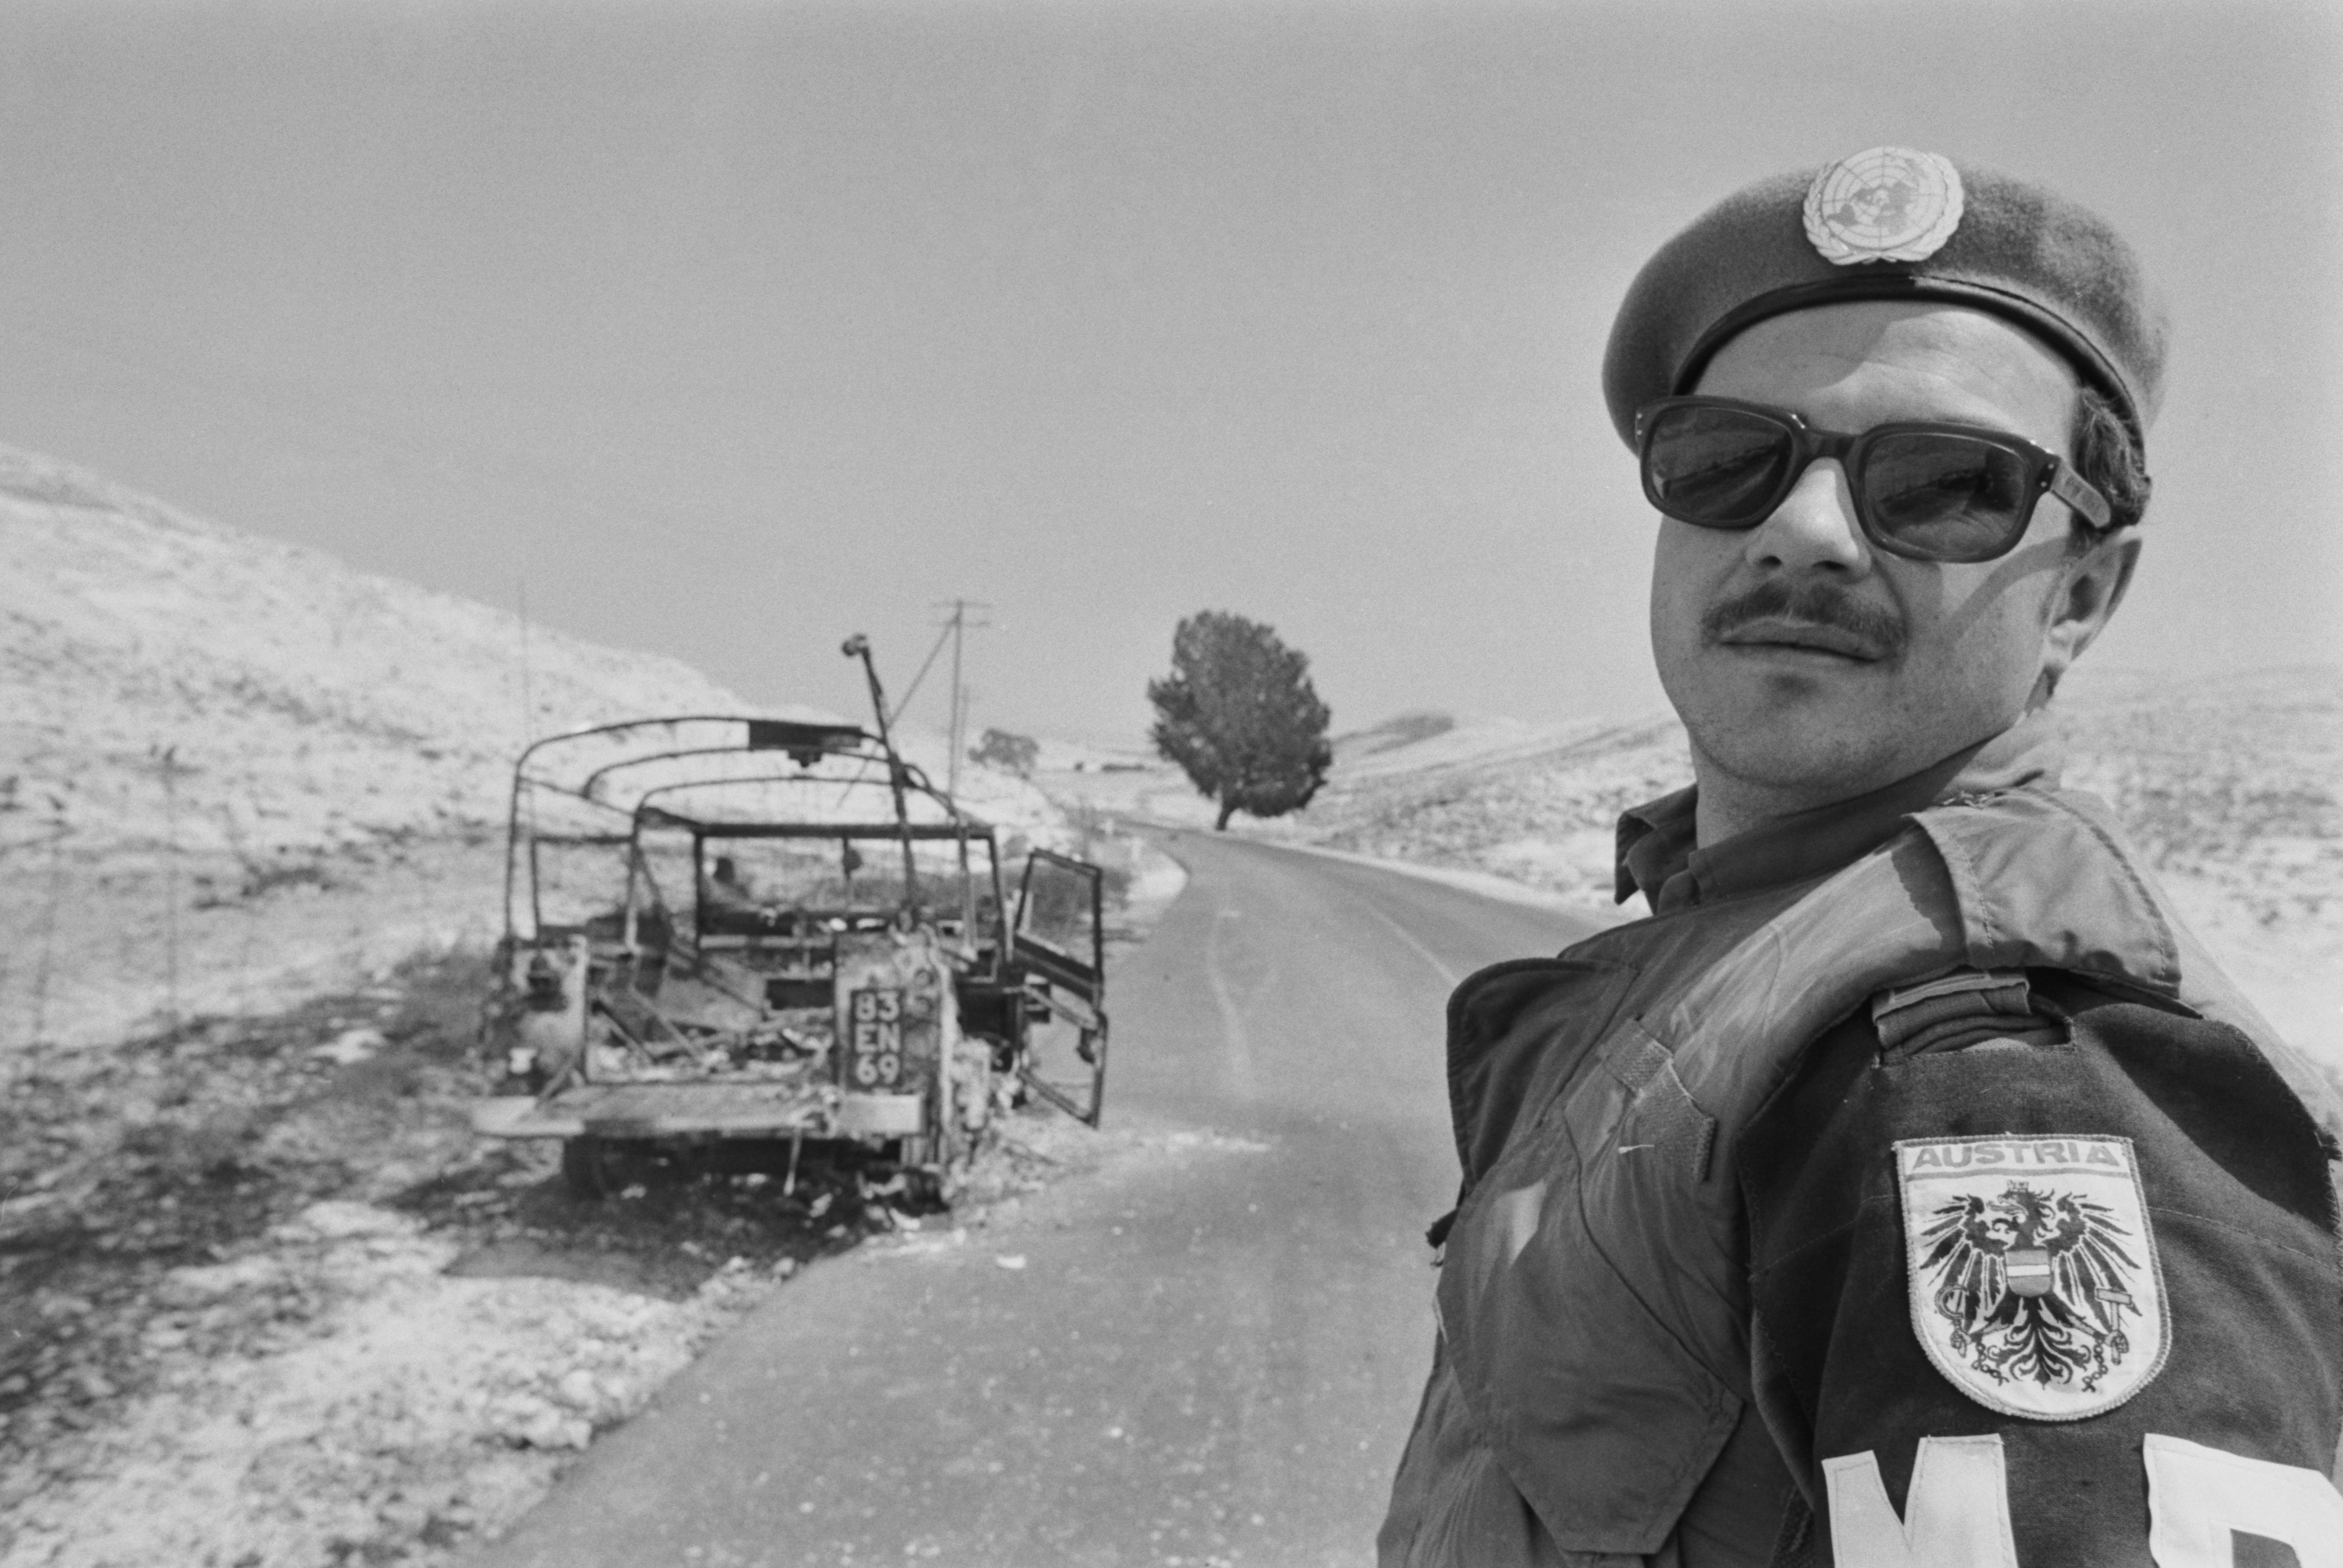 16th August 1974: a member of the Austrian Military Police in Cyprus, during the unrest which followed the military coup d’etat and Turkish invasion